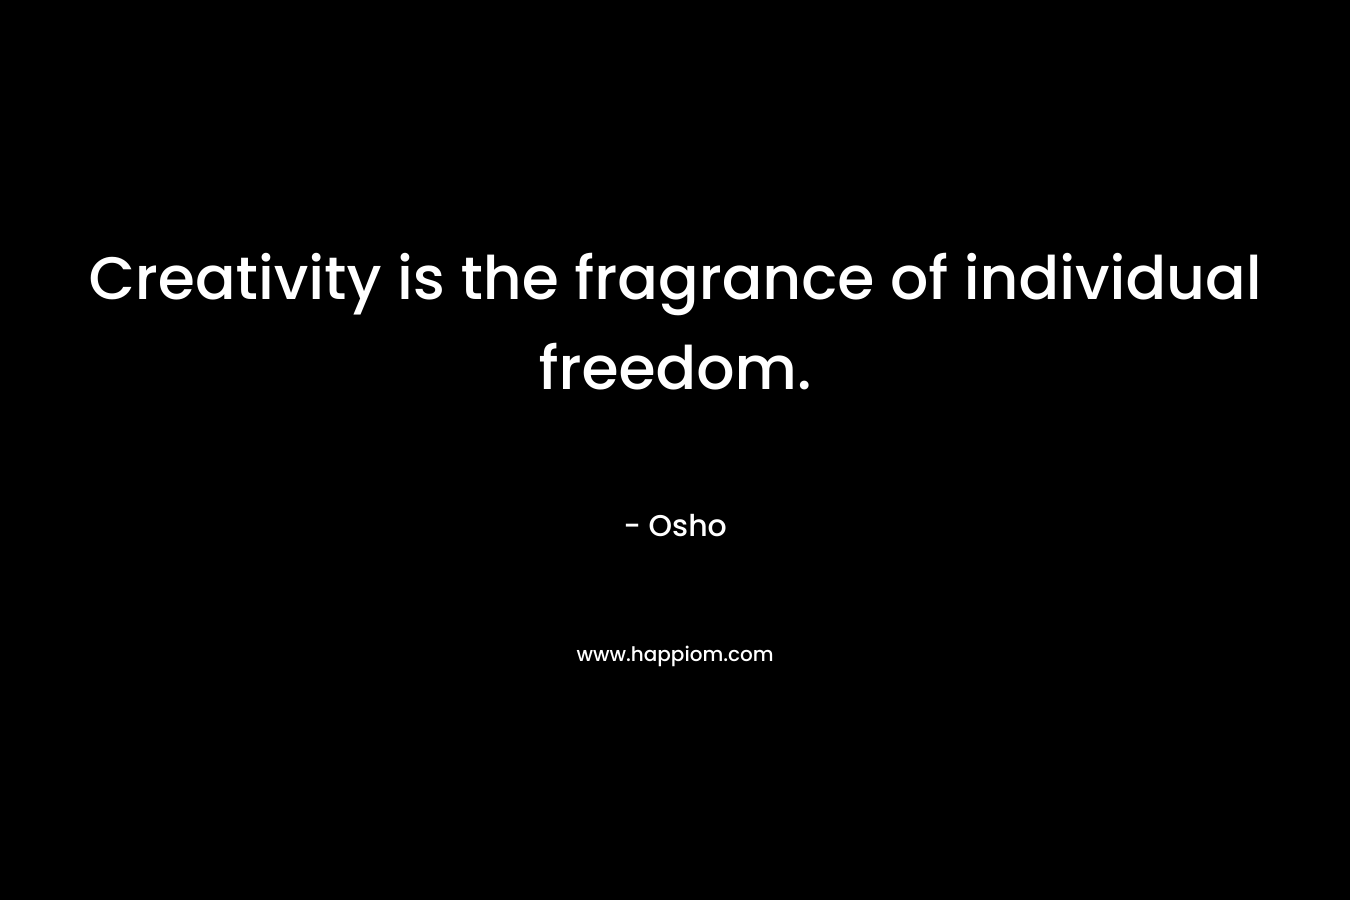 Creativity is the fragrance of individual freedom.